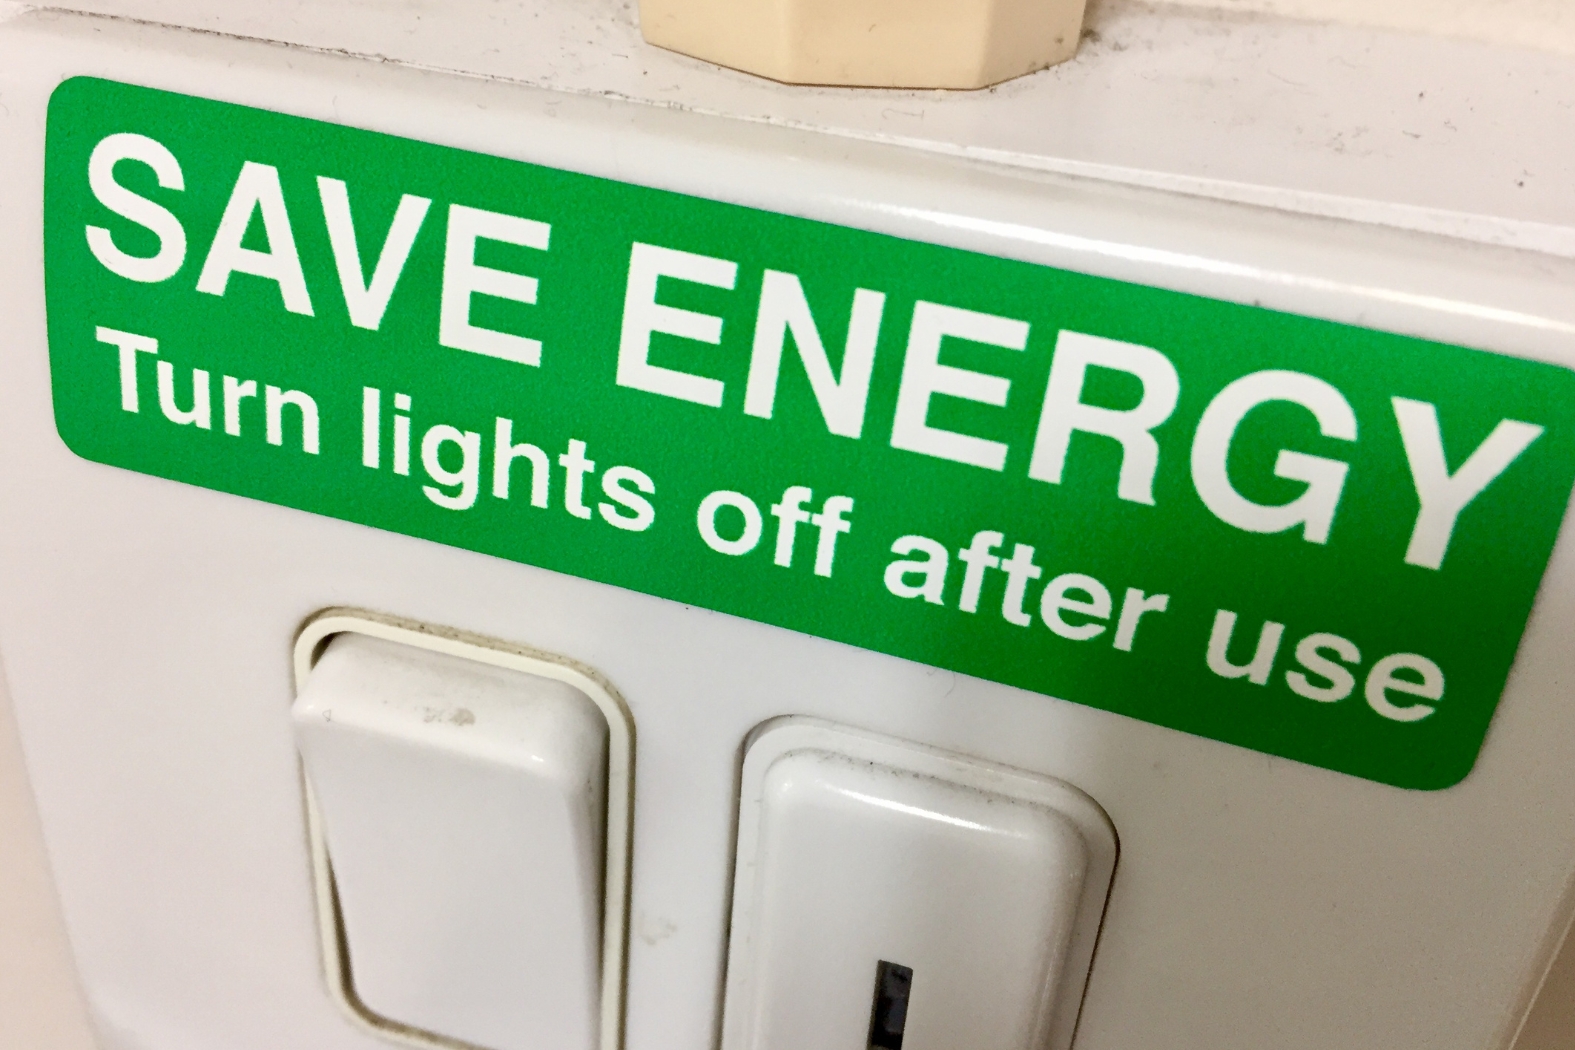 Reduce your direct use of energy